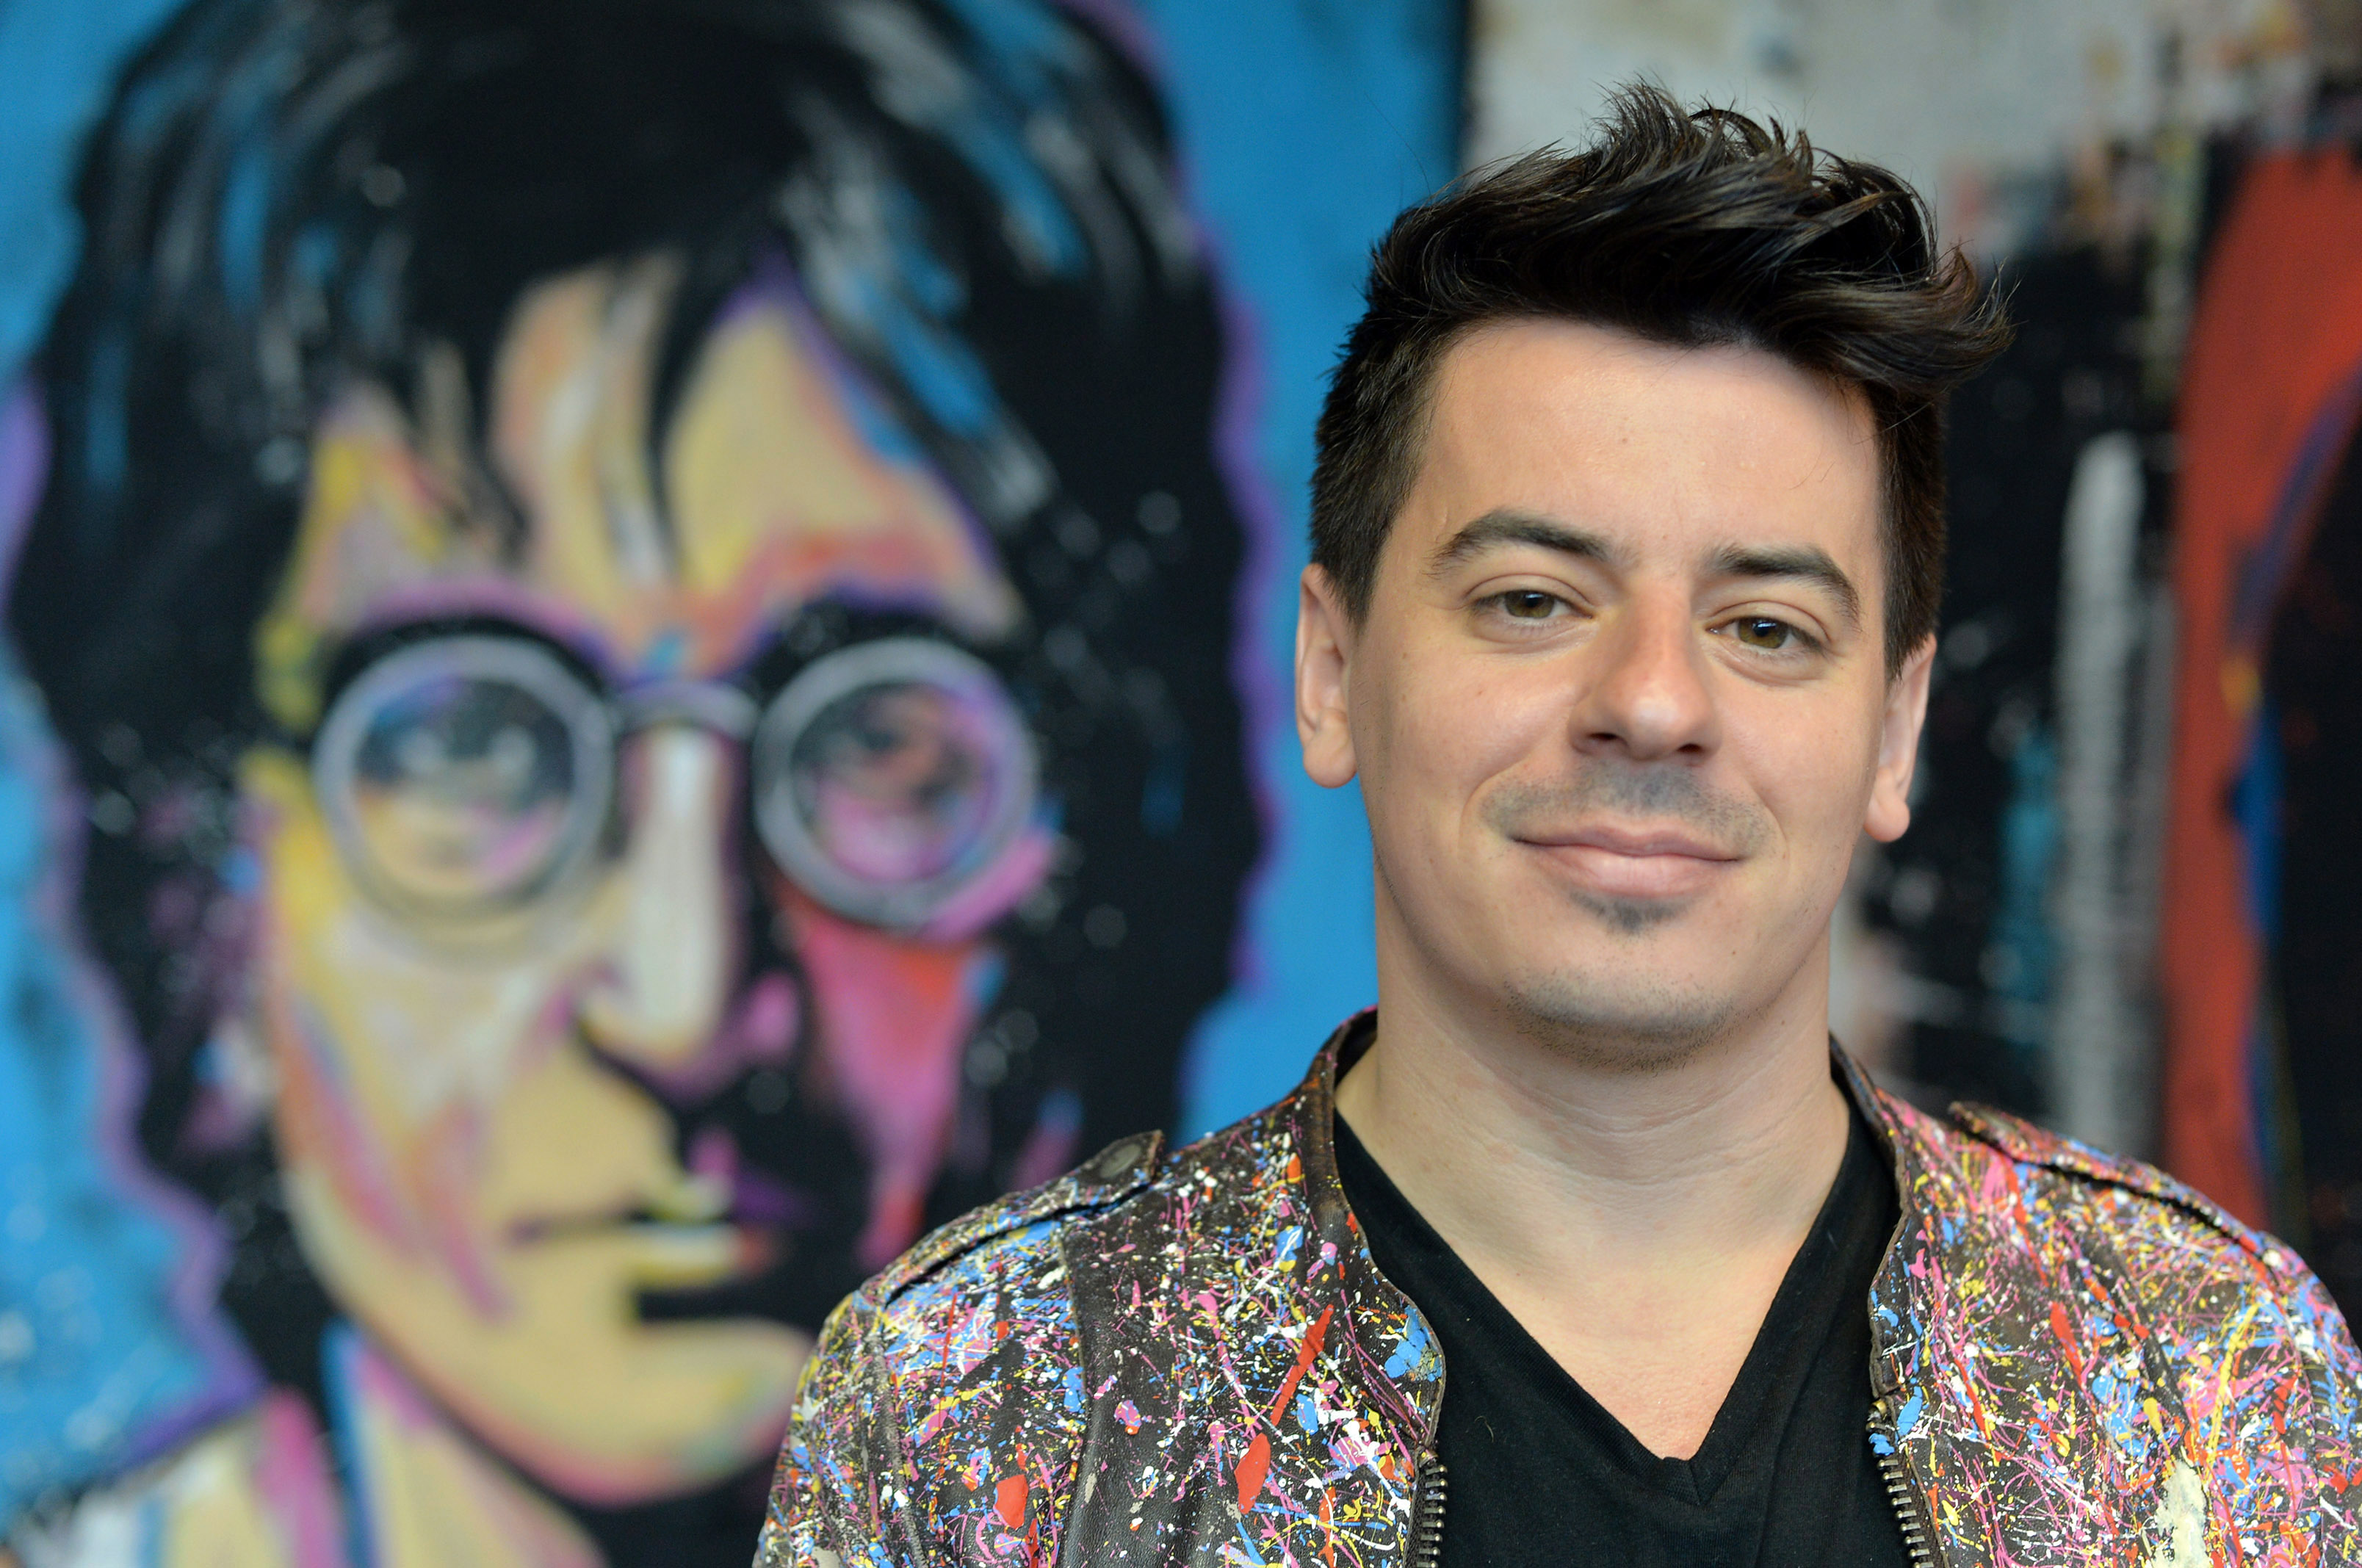 Speed painter to pay homage to idol John Lennon at Go North Wales Tourism Conference in Liverpool